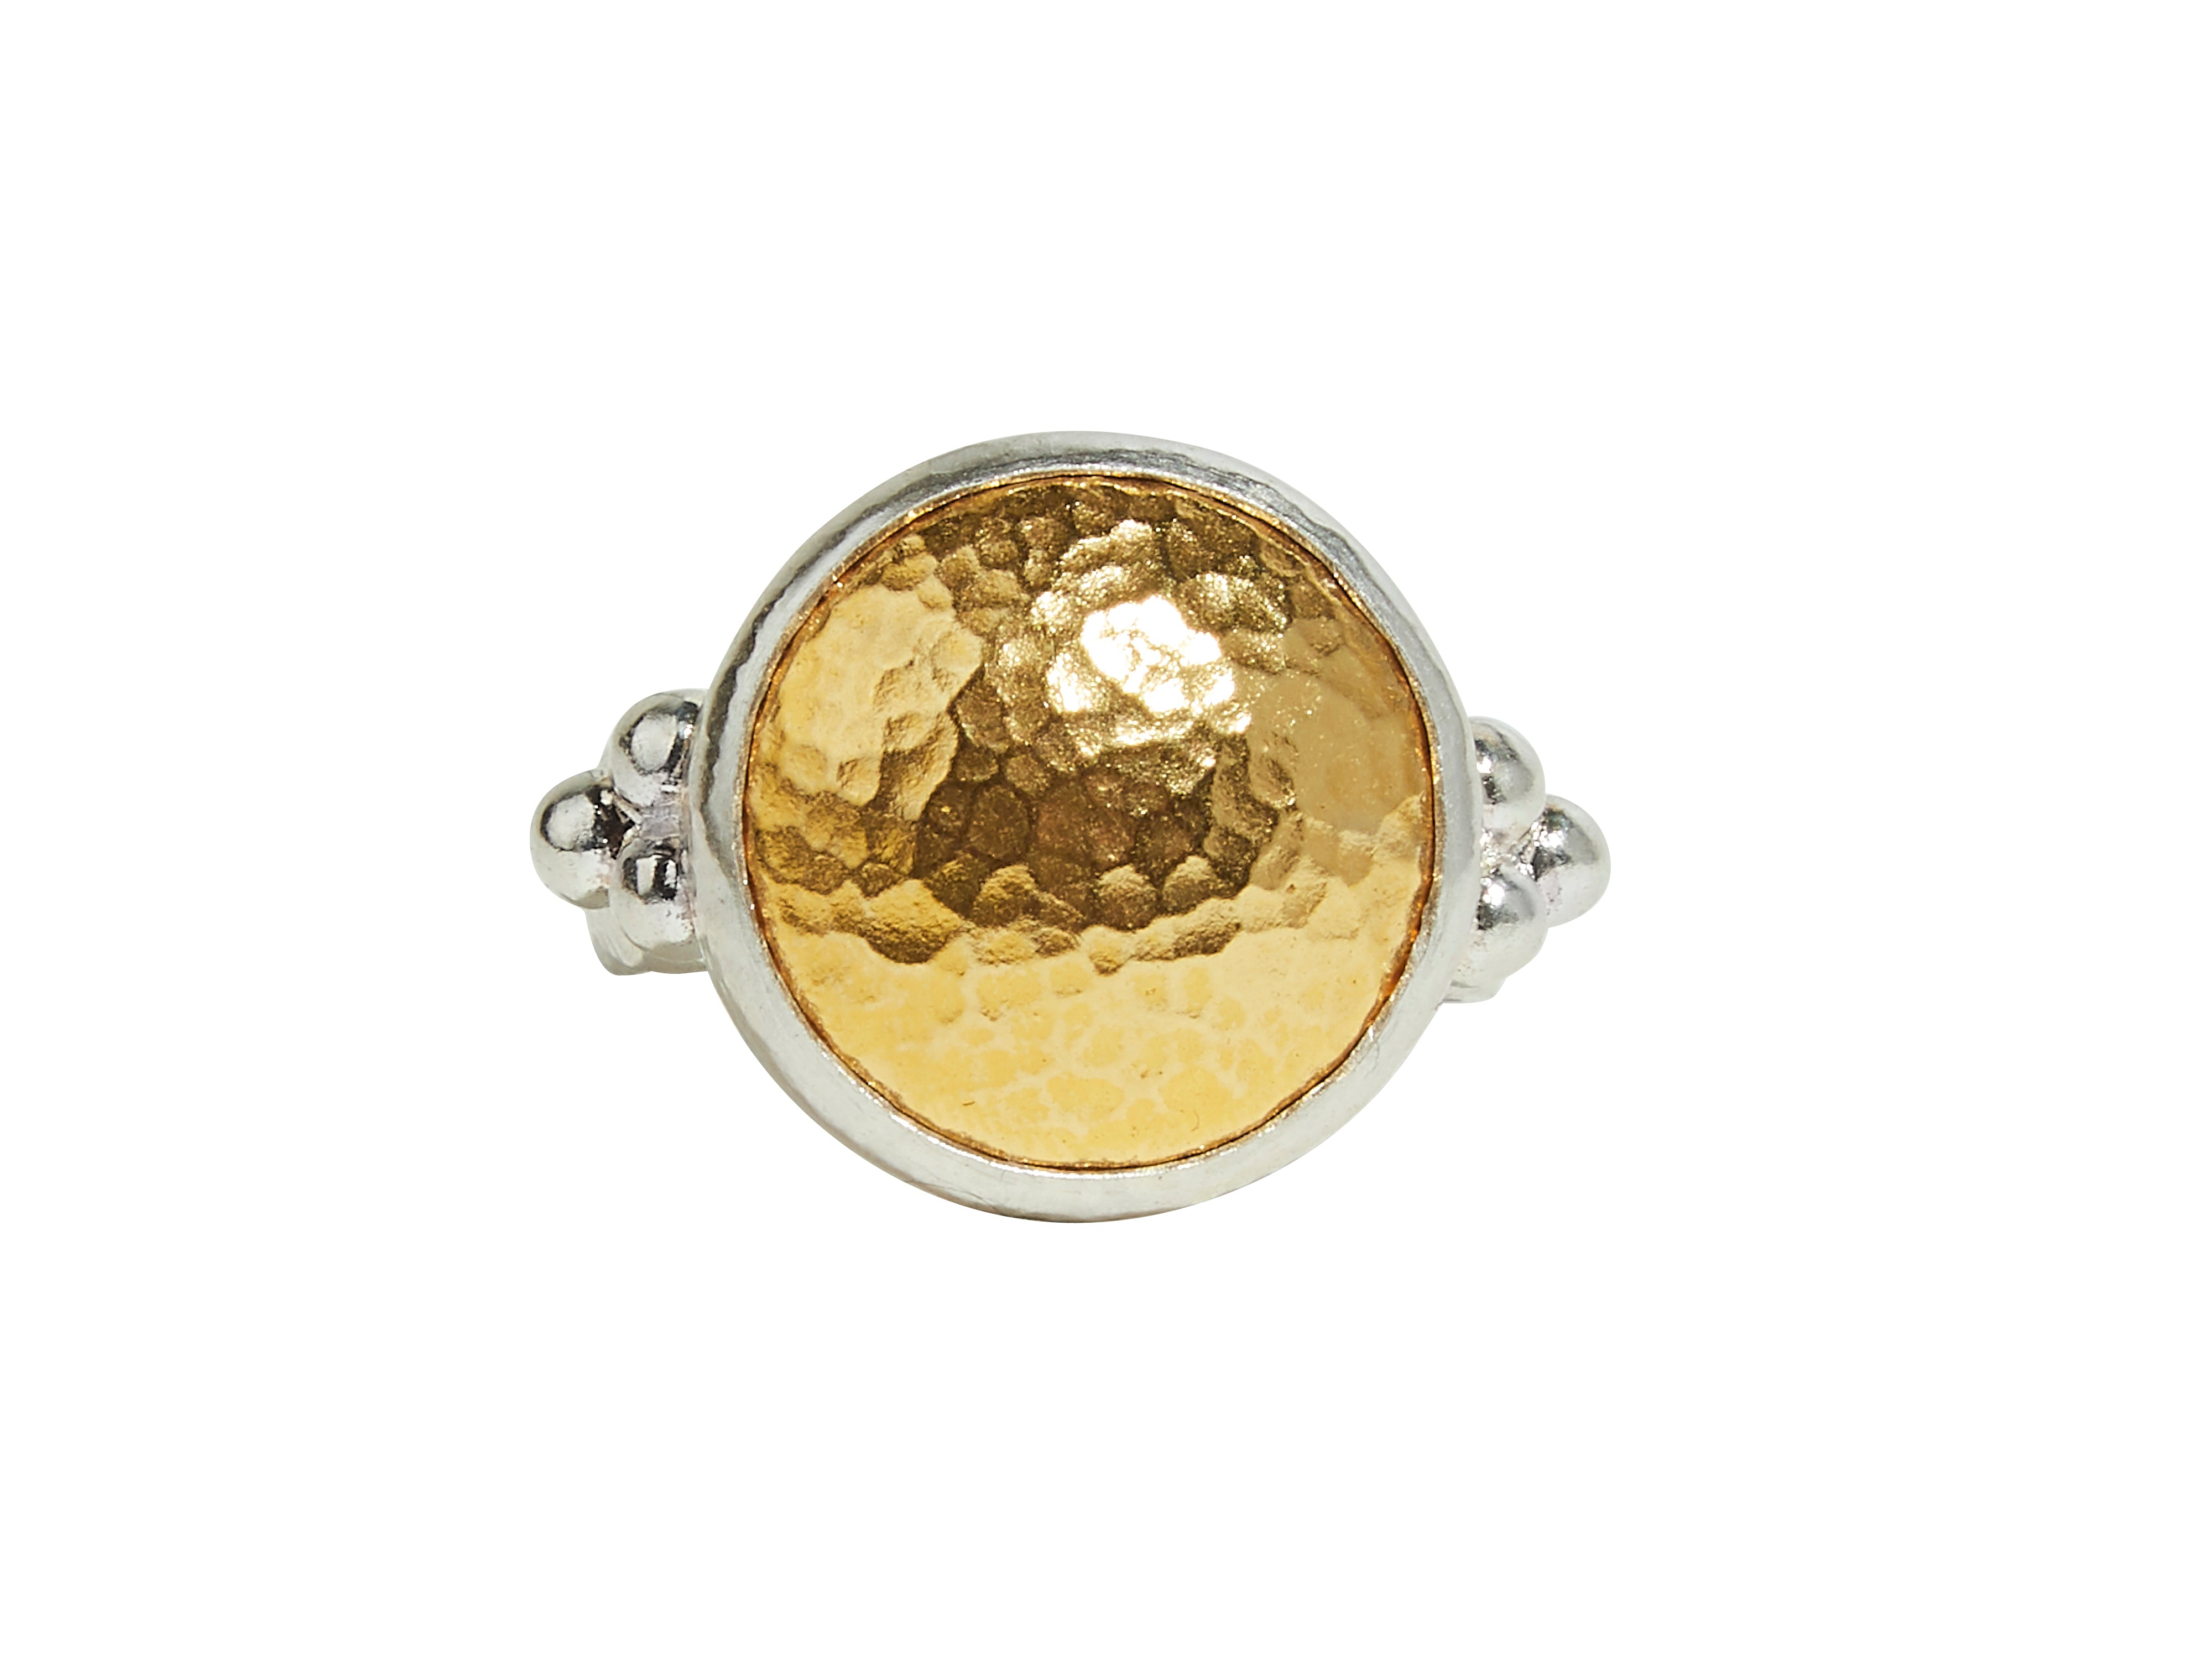 Golden Witch – Vintage 16mm Stainless Steel Metal Rings